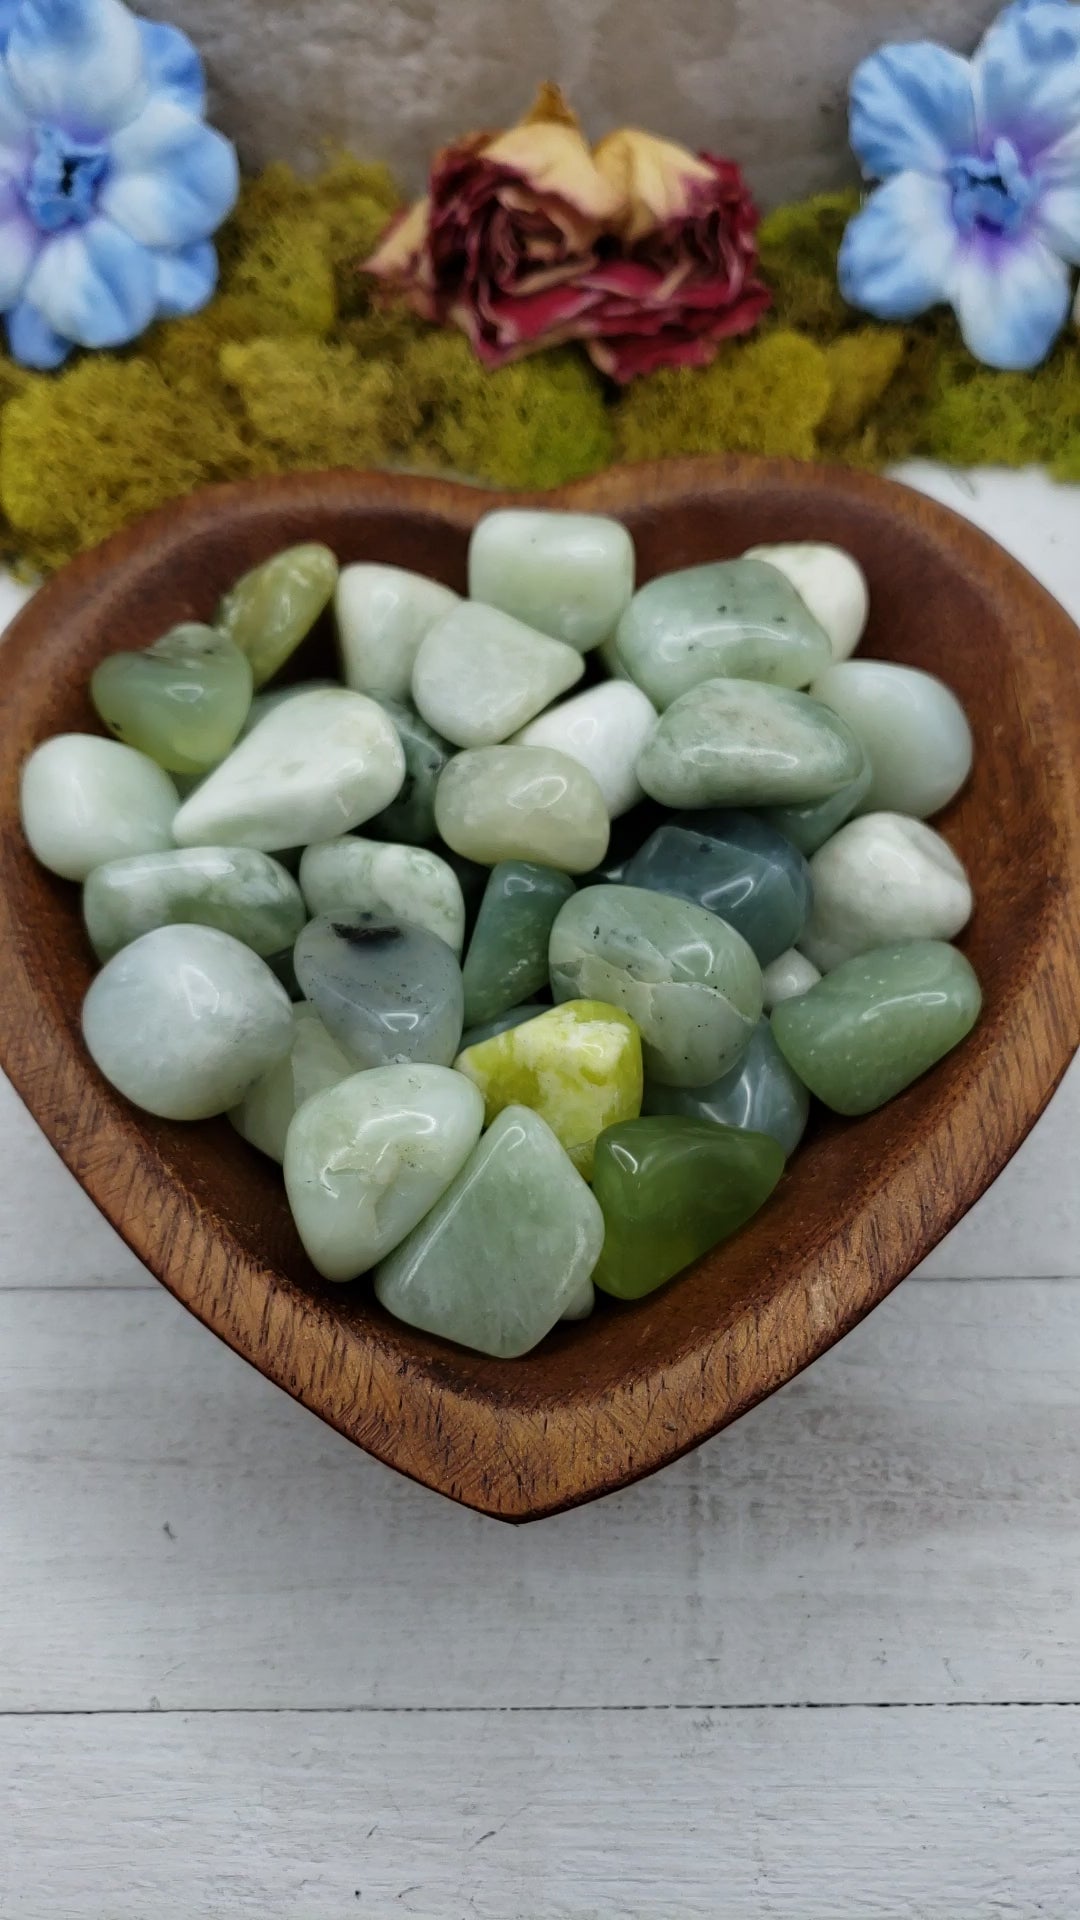 new jade stones in heart-shaped bowl